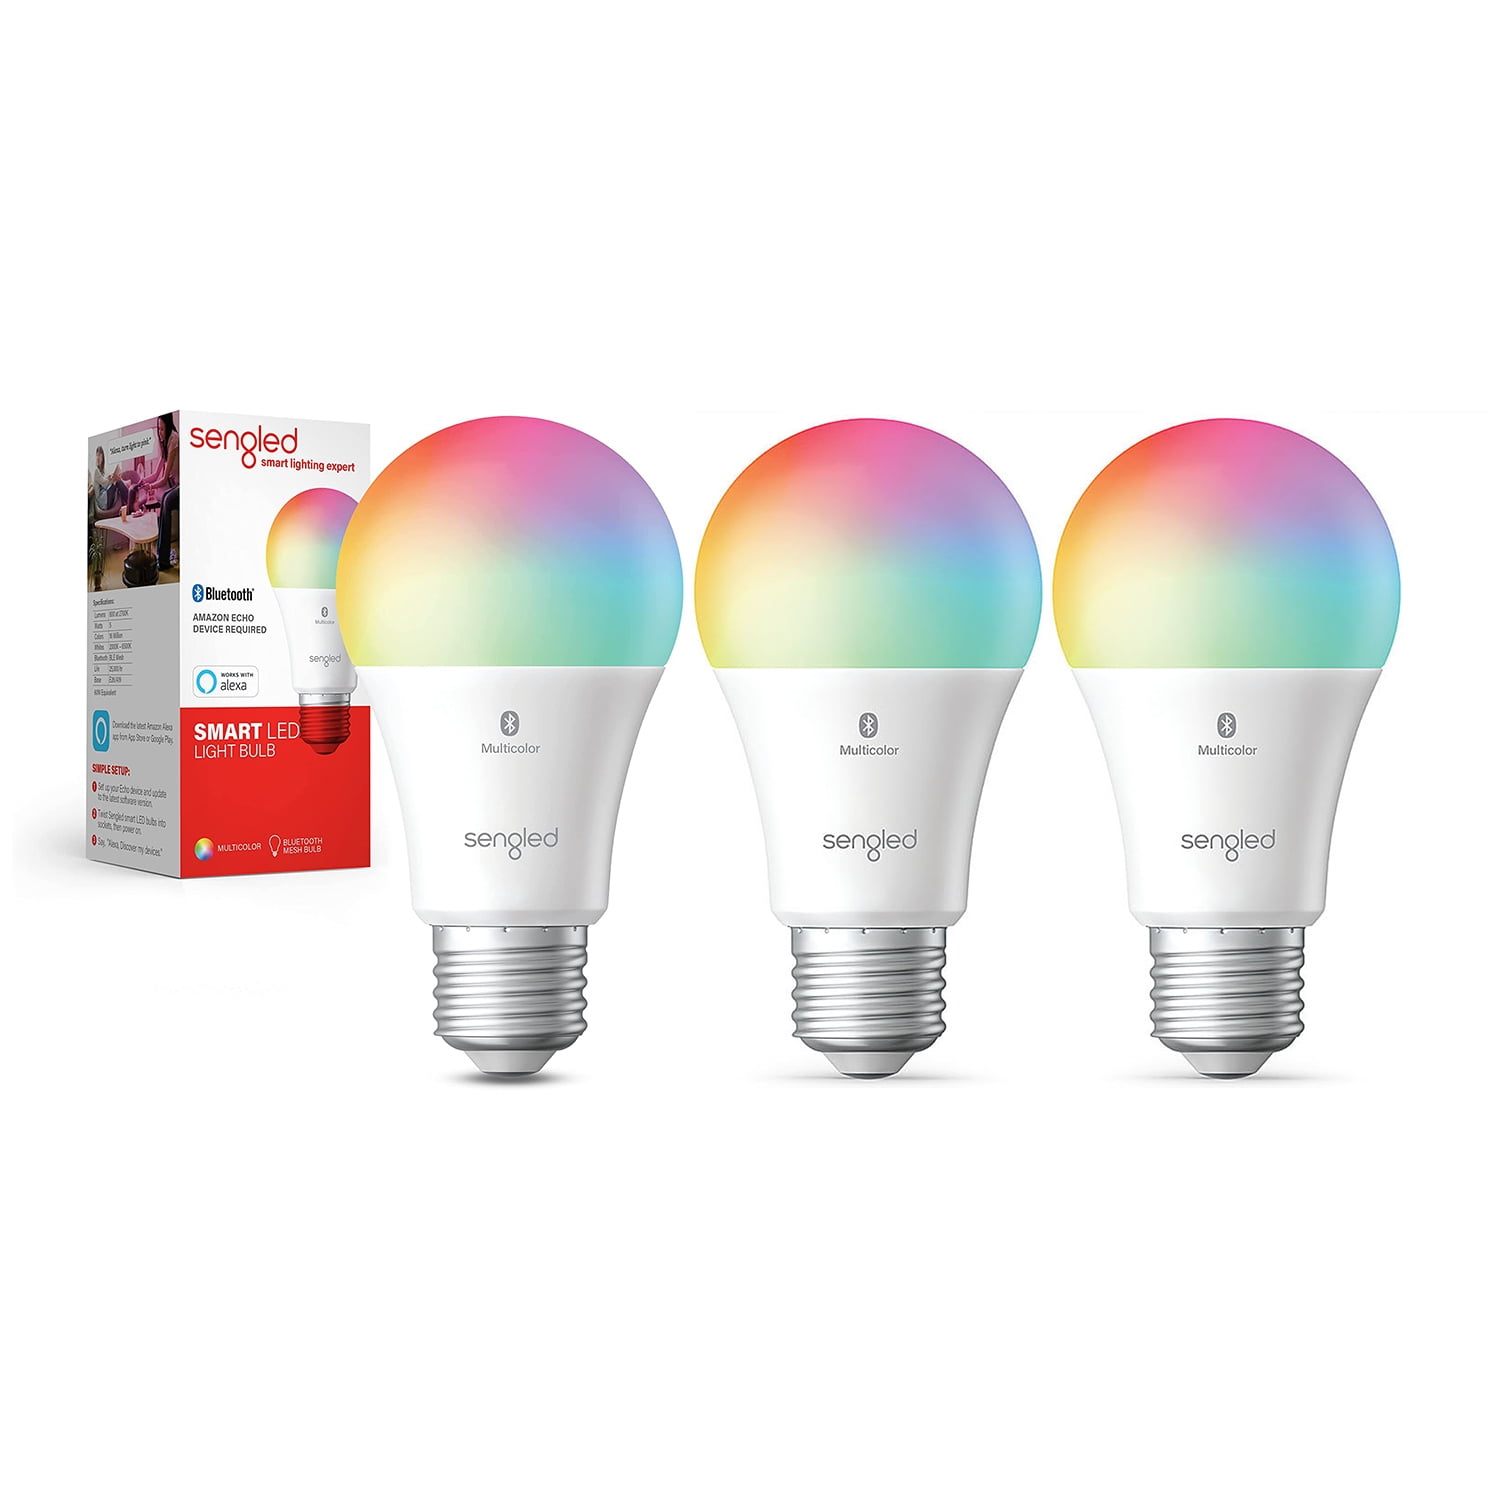 2000-6500K 1 Pack Sengled Smart Wi-Fi LED Multicolor Bulb 60W Equivalent Light No Hub Required Works with Alexa & Google Assistant 